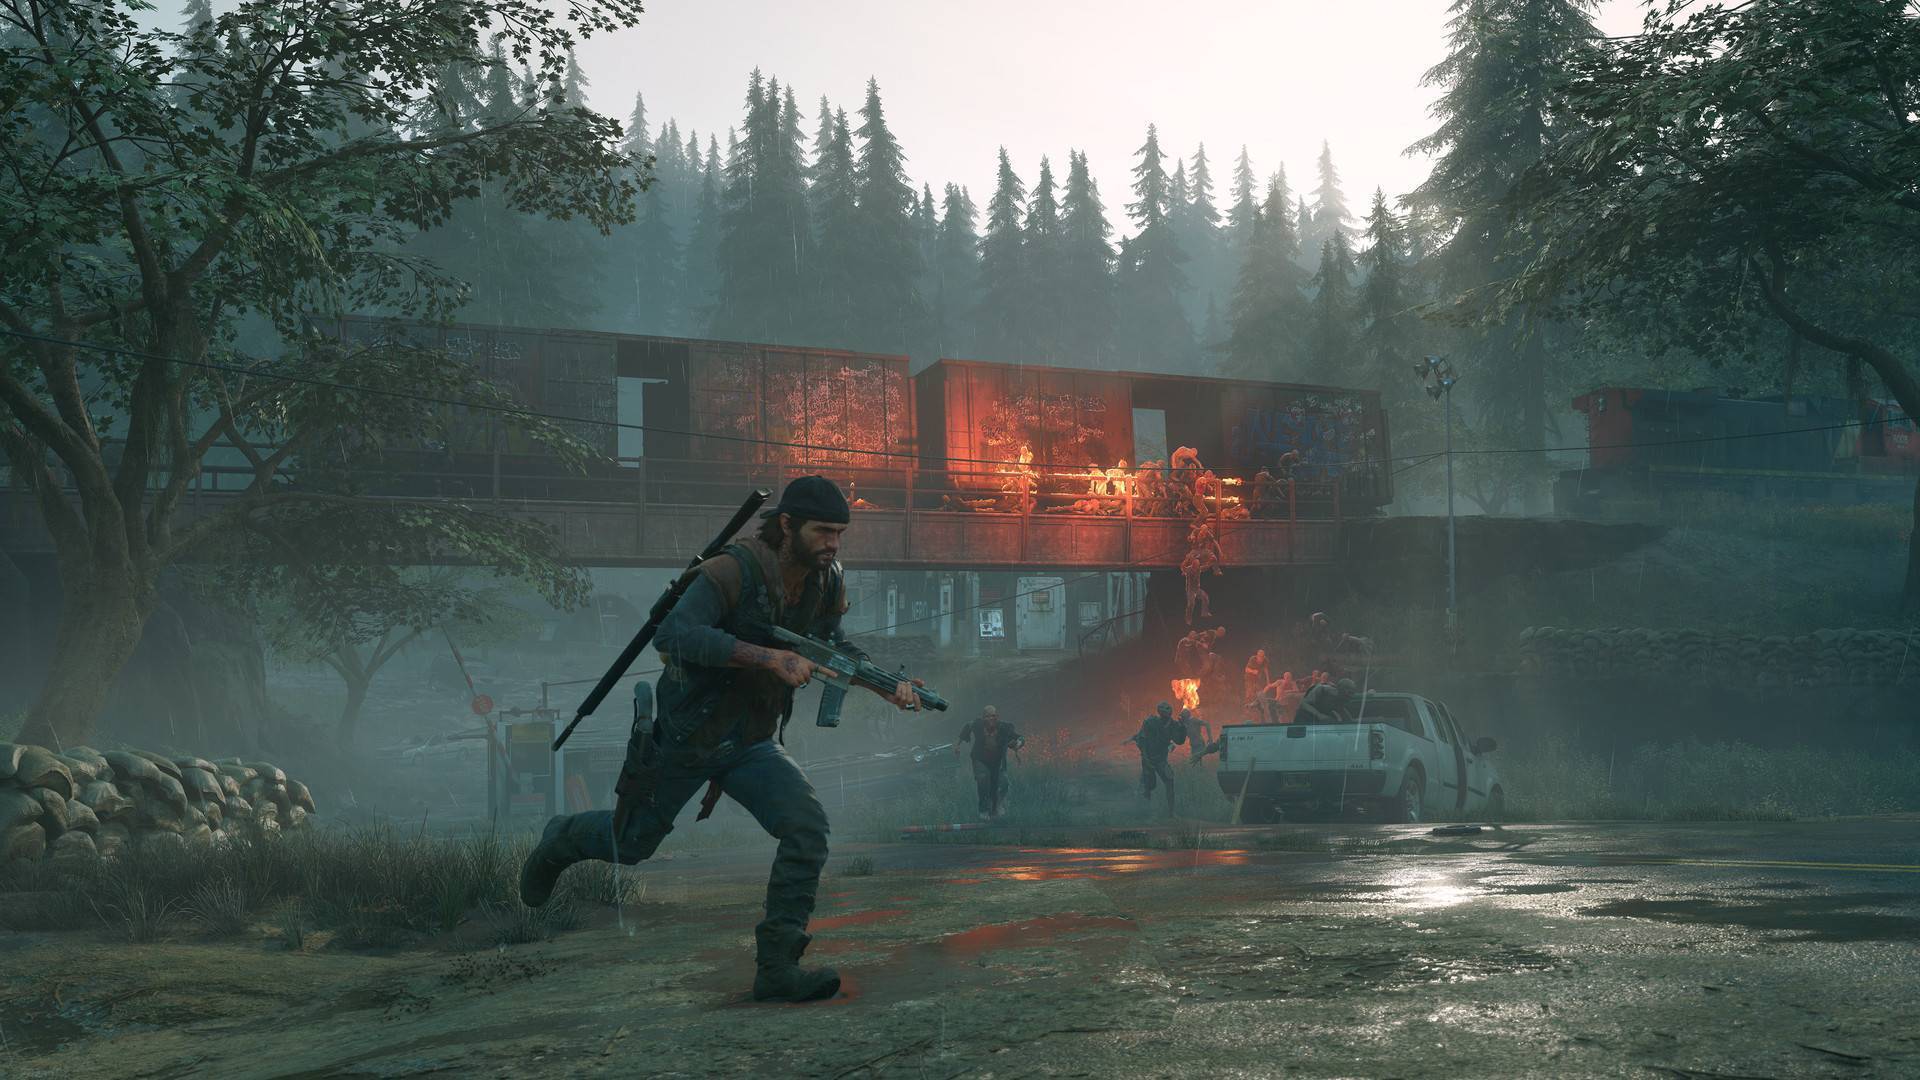 2Cap Days Gone Pc Game Download (Offline only) No CD/DVD/Code (Complete  Games) (Complete Edition) Price in India - Buy 2Cap Days Gone Pc Game  Download (Offline only) No CD/DVD/Code (Complete Games) (Complete